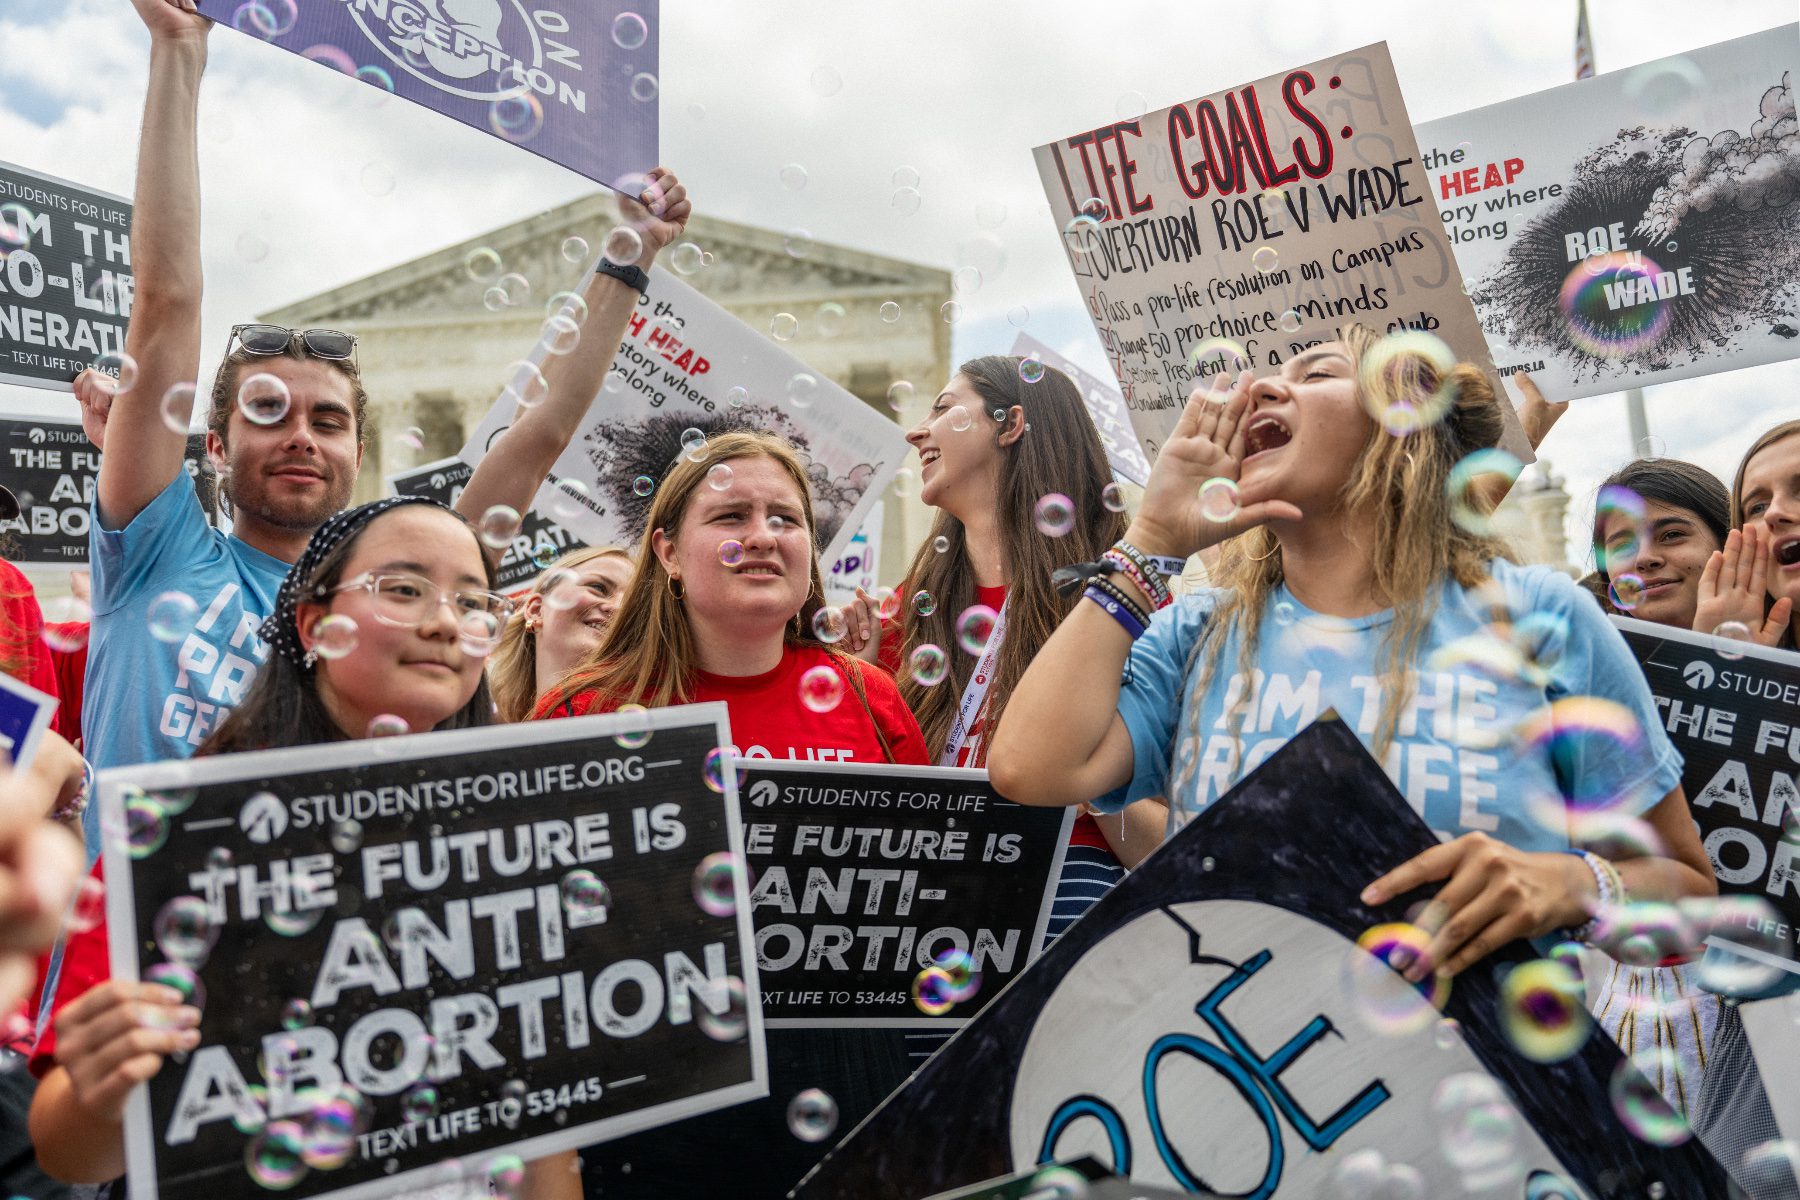 Anti-abortion activists celebrate in response to the Dobbs v. Jackson Women's Health Organization ruling in front of the U.S. Supreme Court.